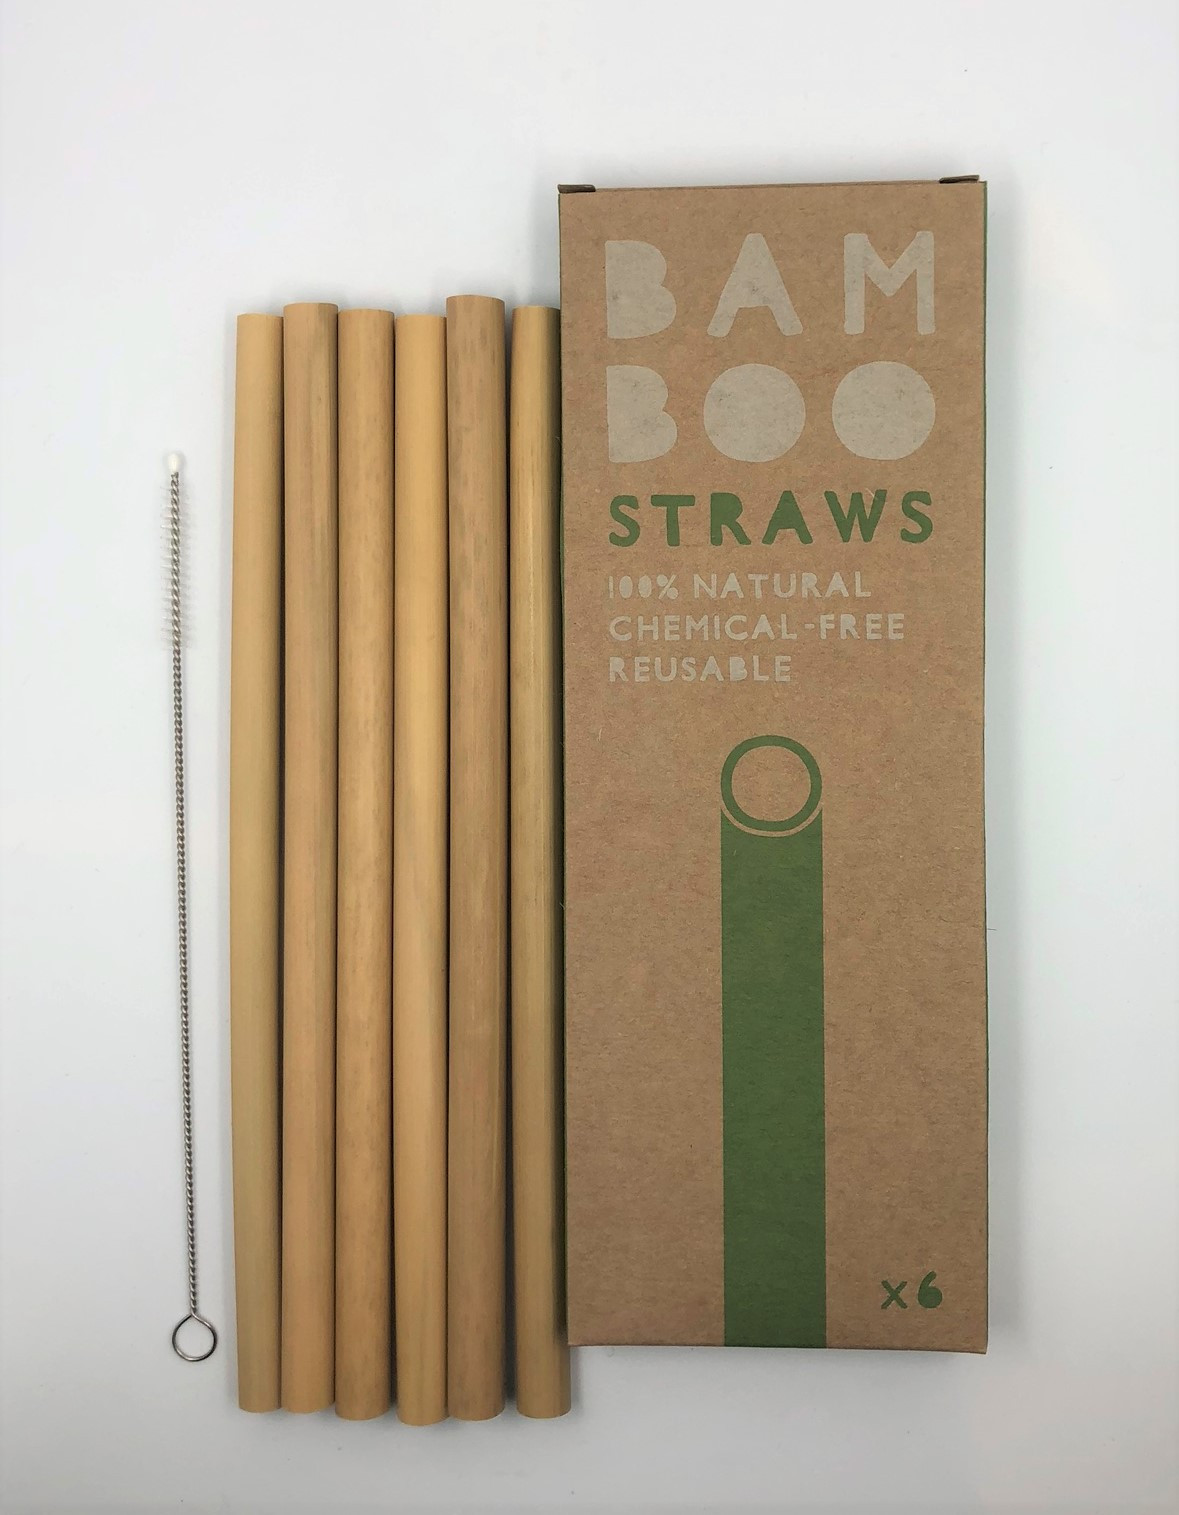 6 Bamboo Straws with a straw cleaner and a 100% cotton drawstring bag.